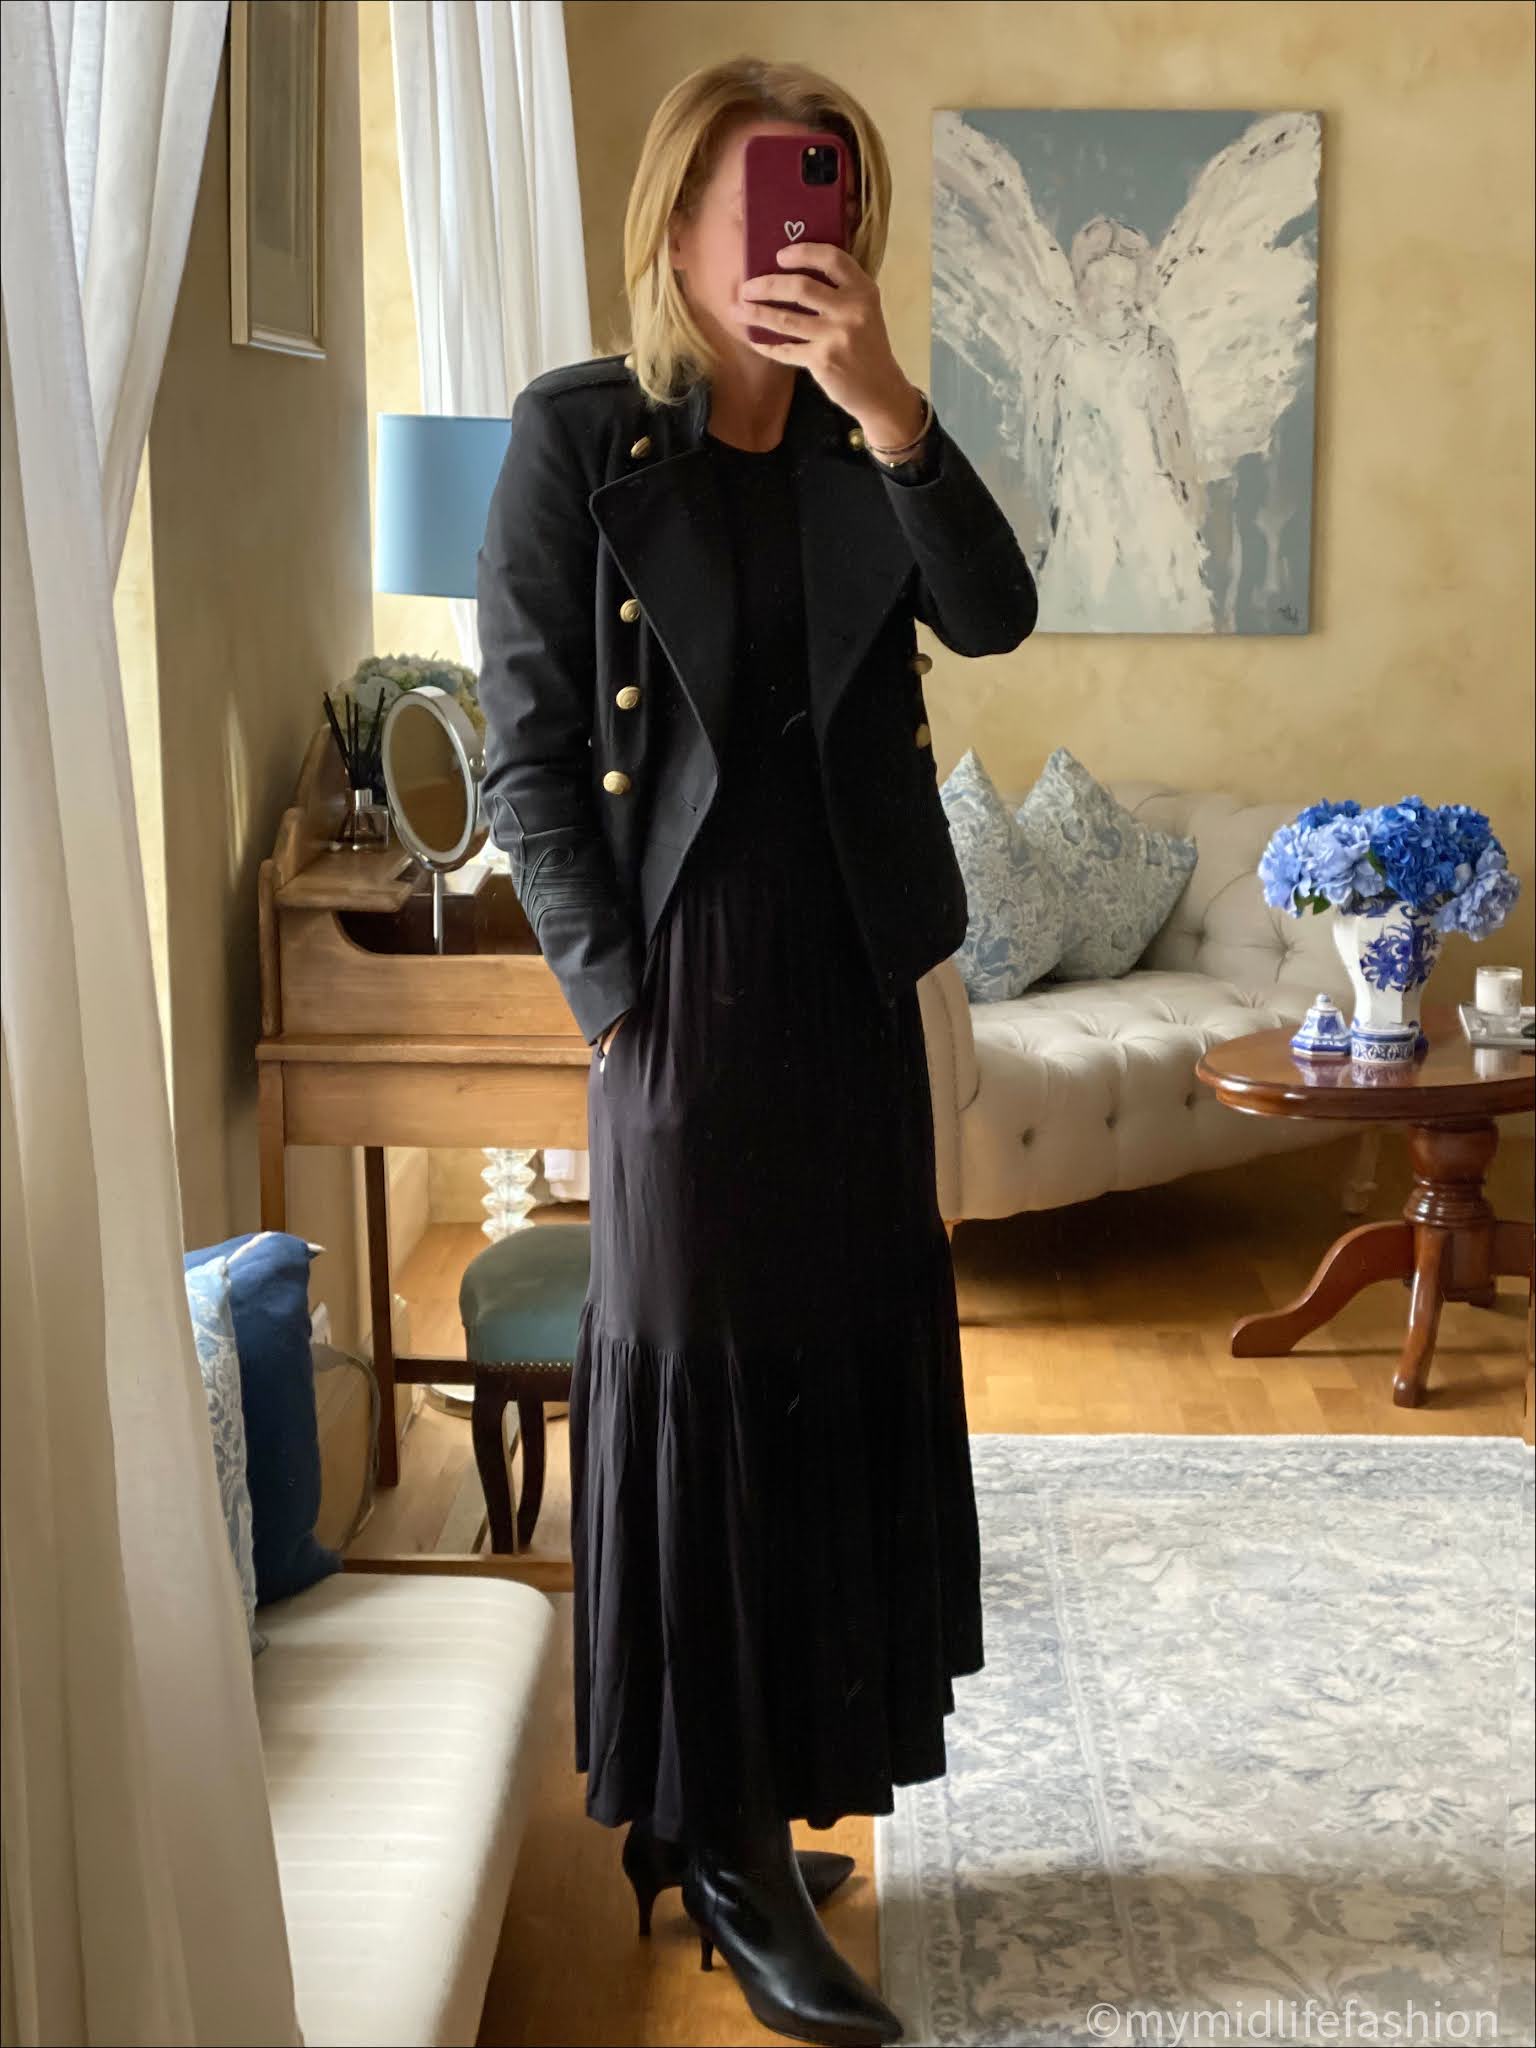 my midlife fashion, saint and Sofia greenwich dress, Isabel Marant Etoile military jacket, sole bliss kitten heel ankle boots